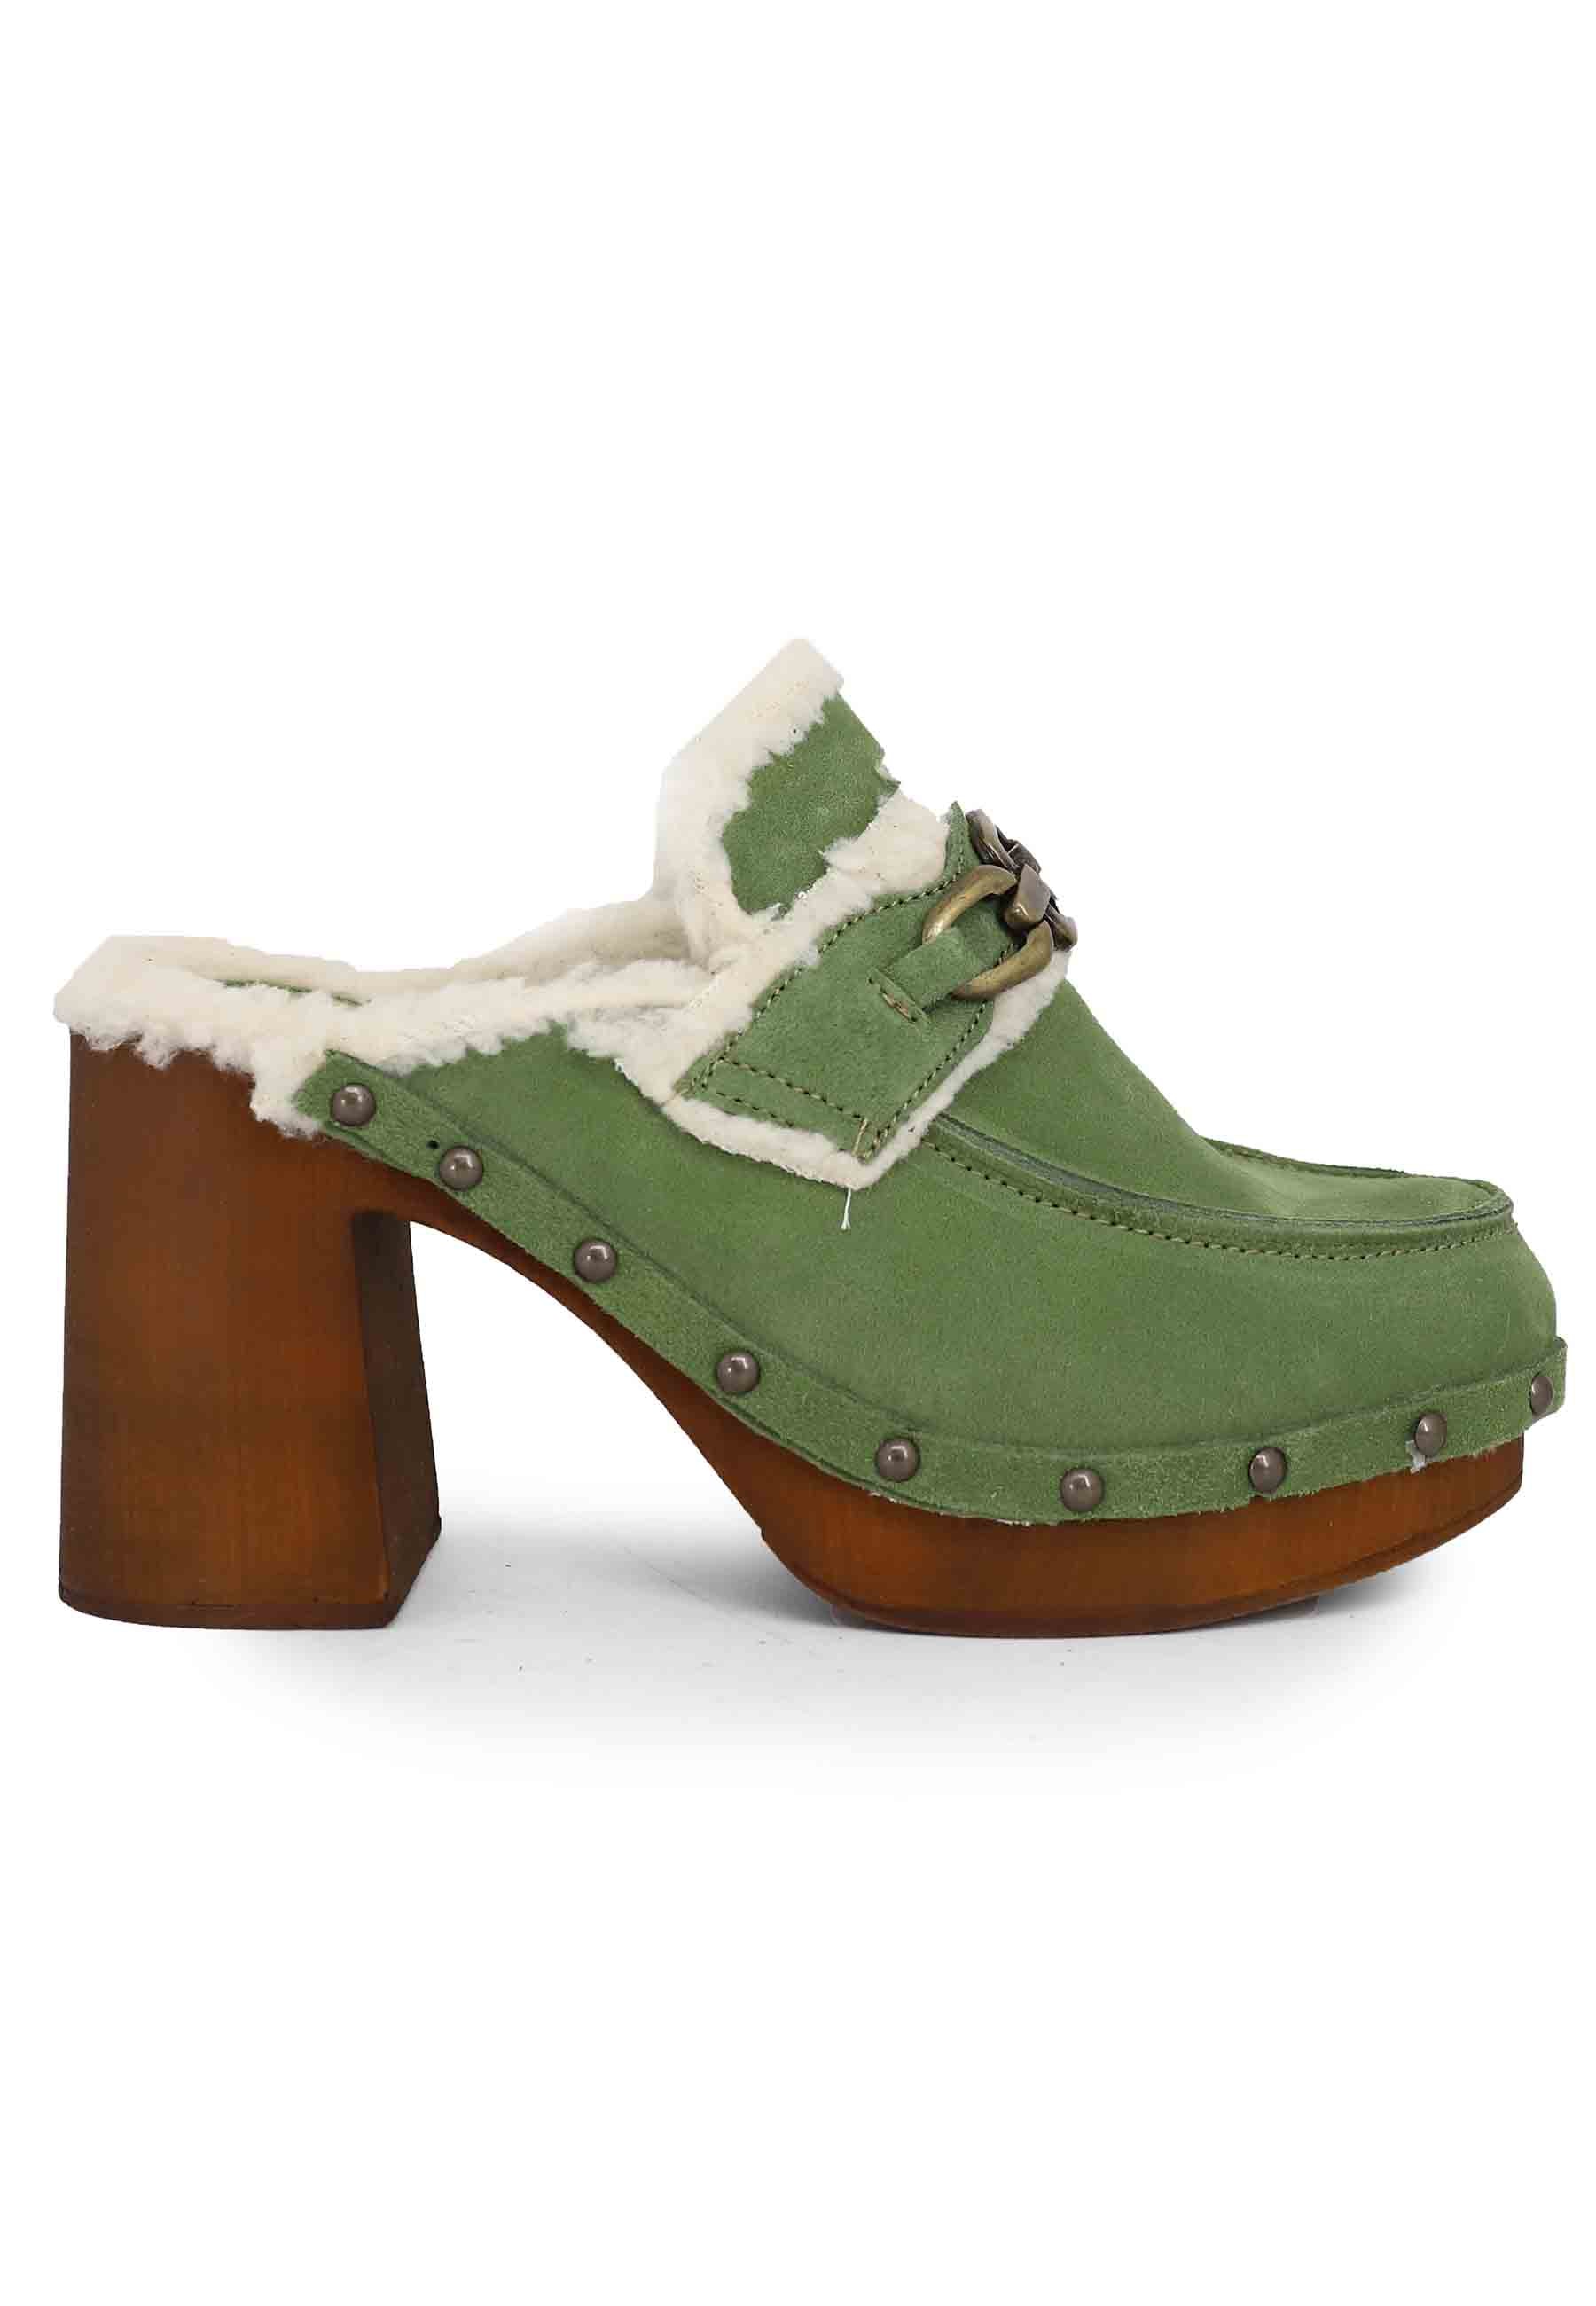 Women's clogs in green suede with eco fur lining and high heel